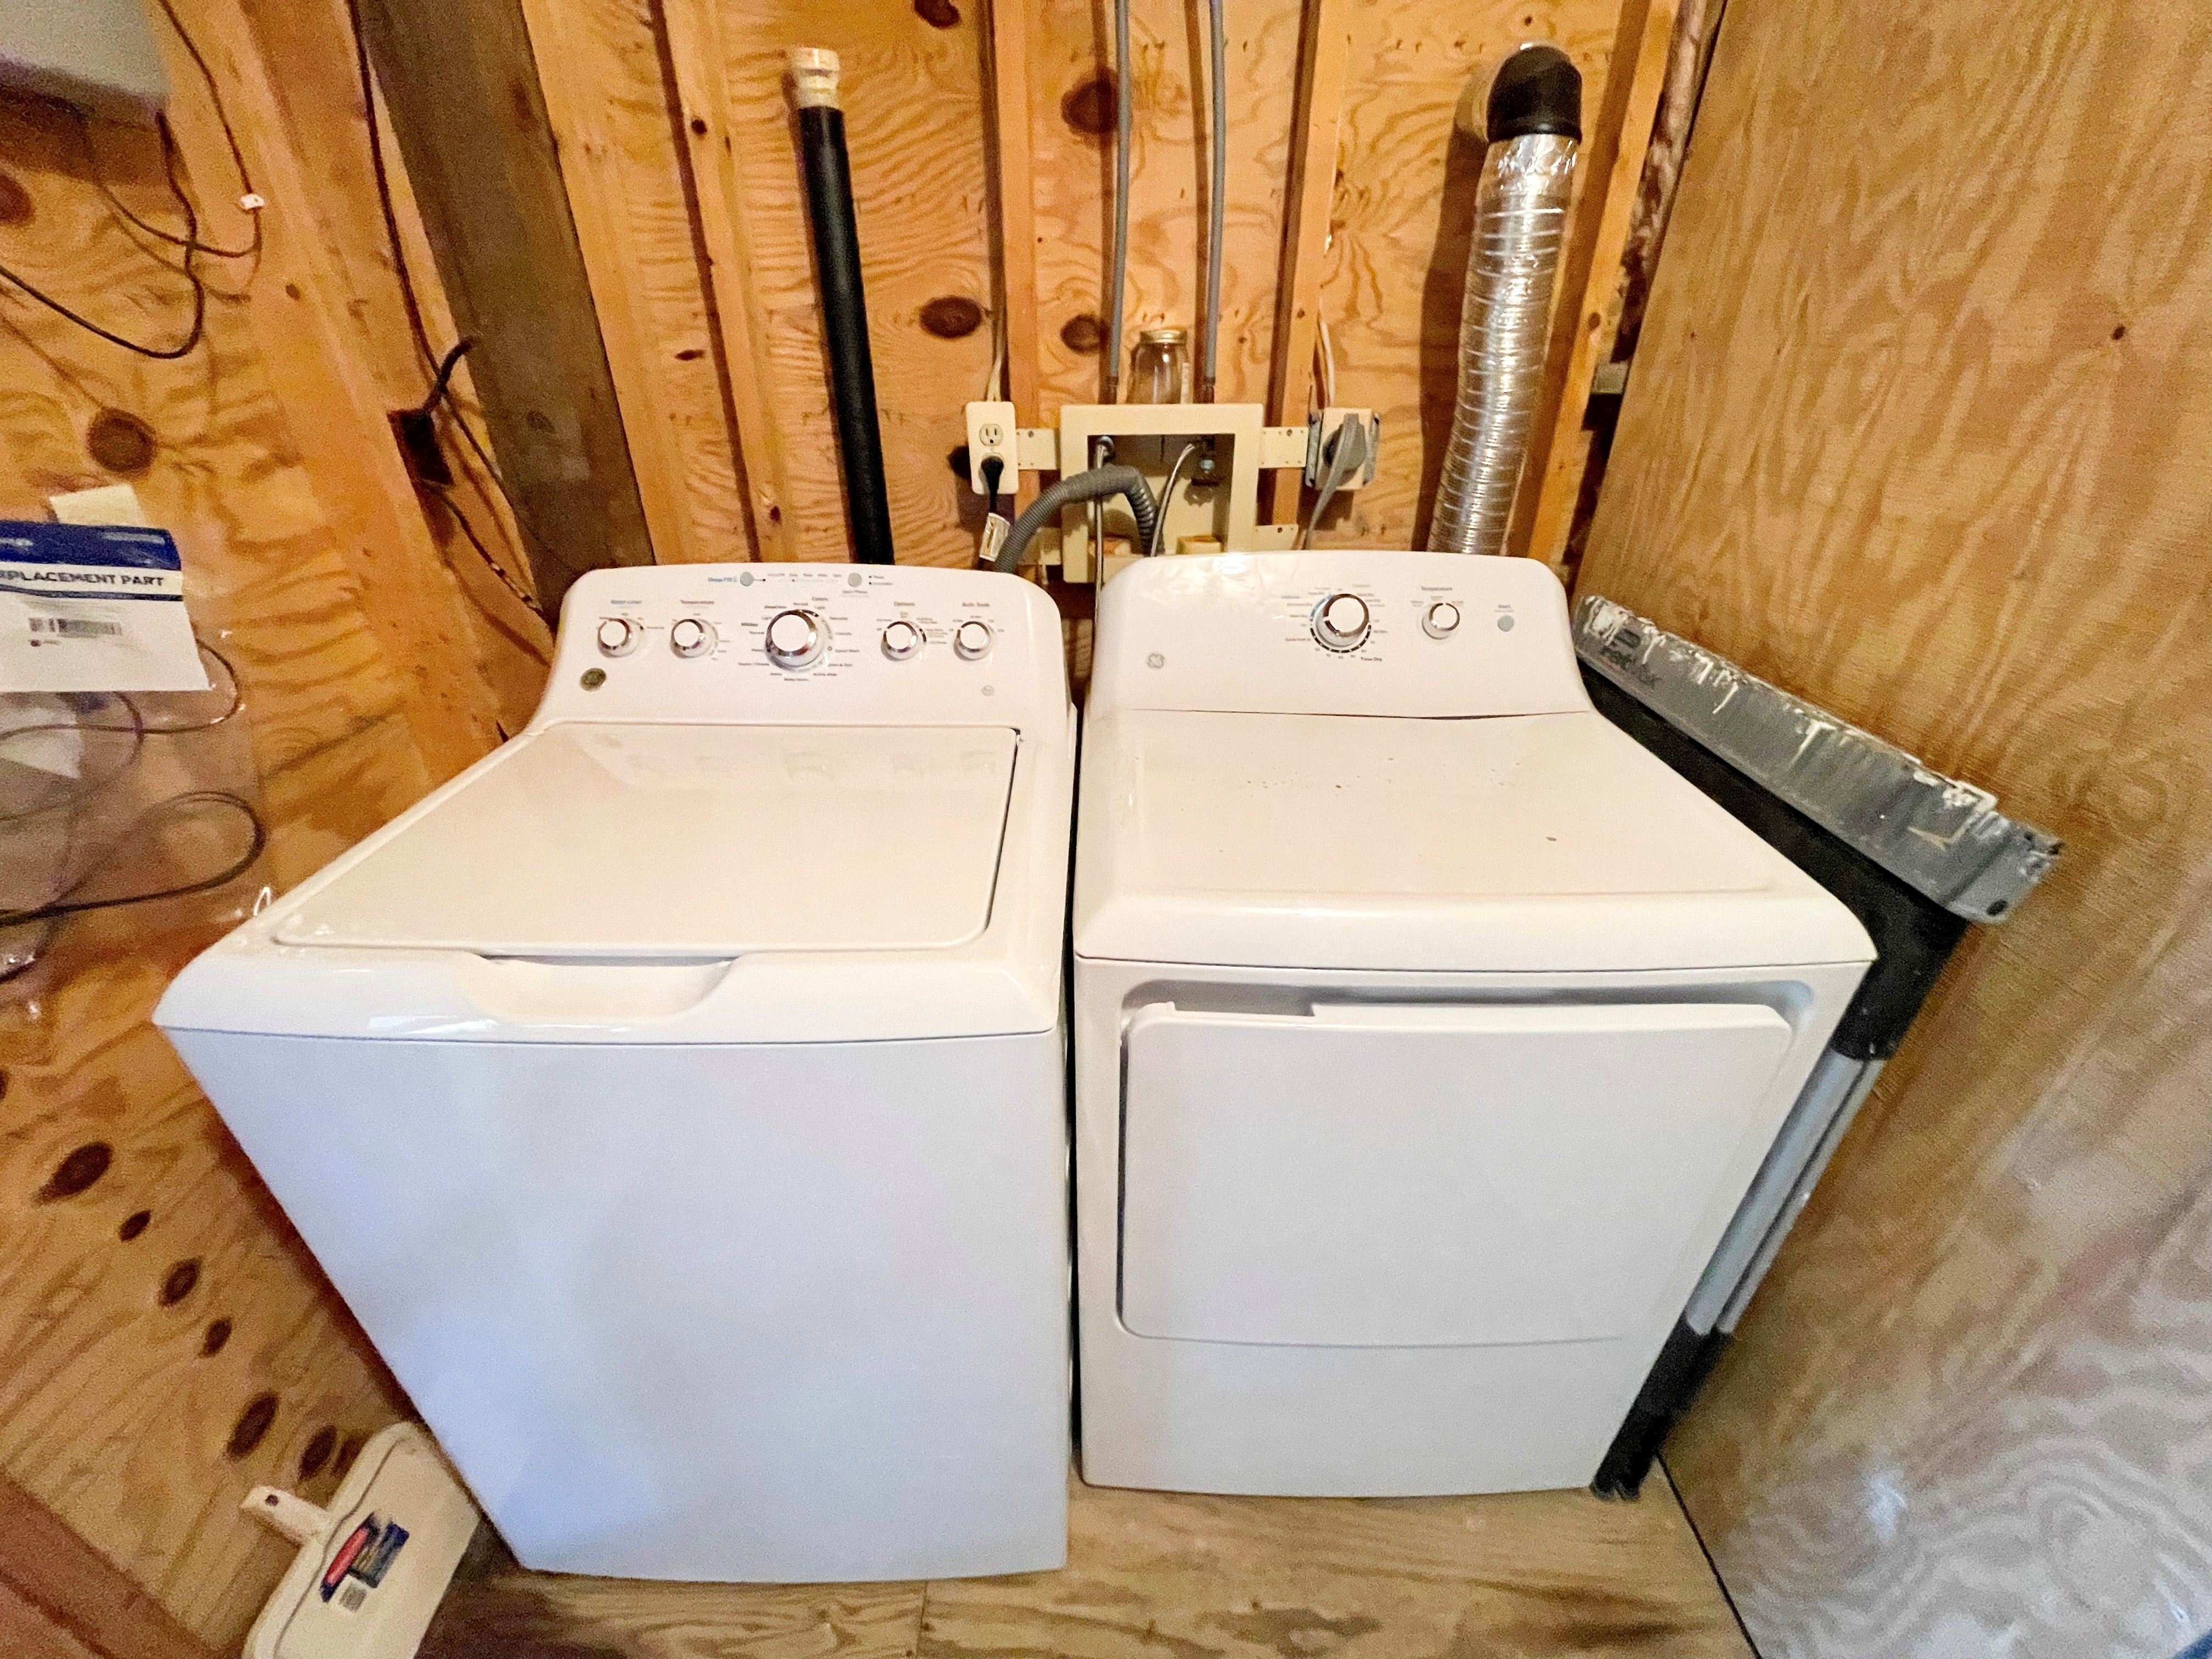 Washer and Dryer in Laundry Shed